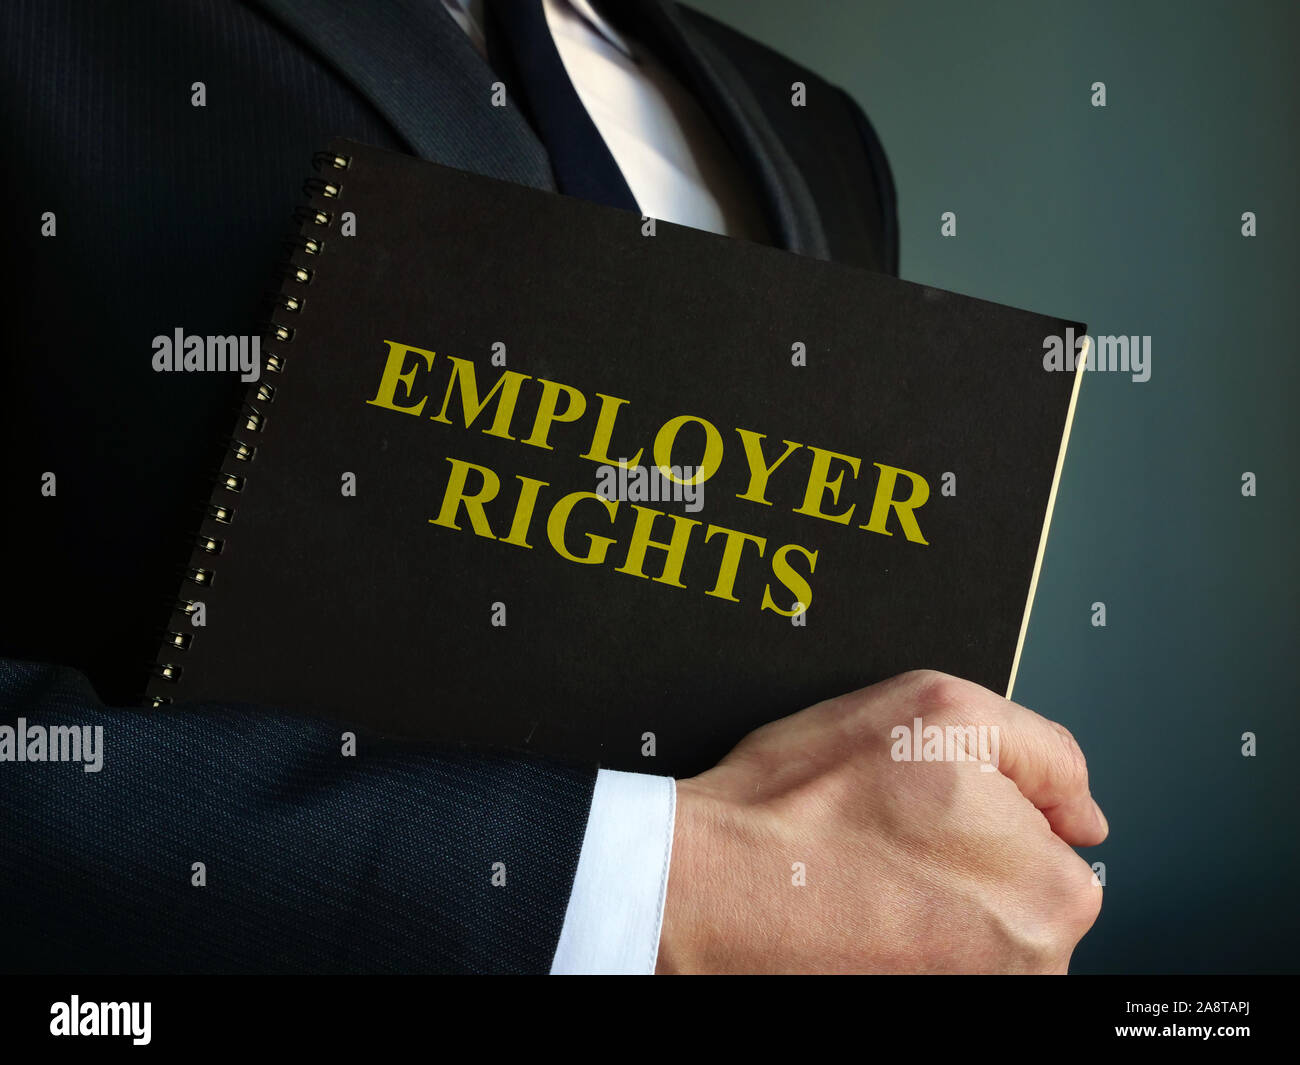 Employer rights is in the hands. Stock Photo